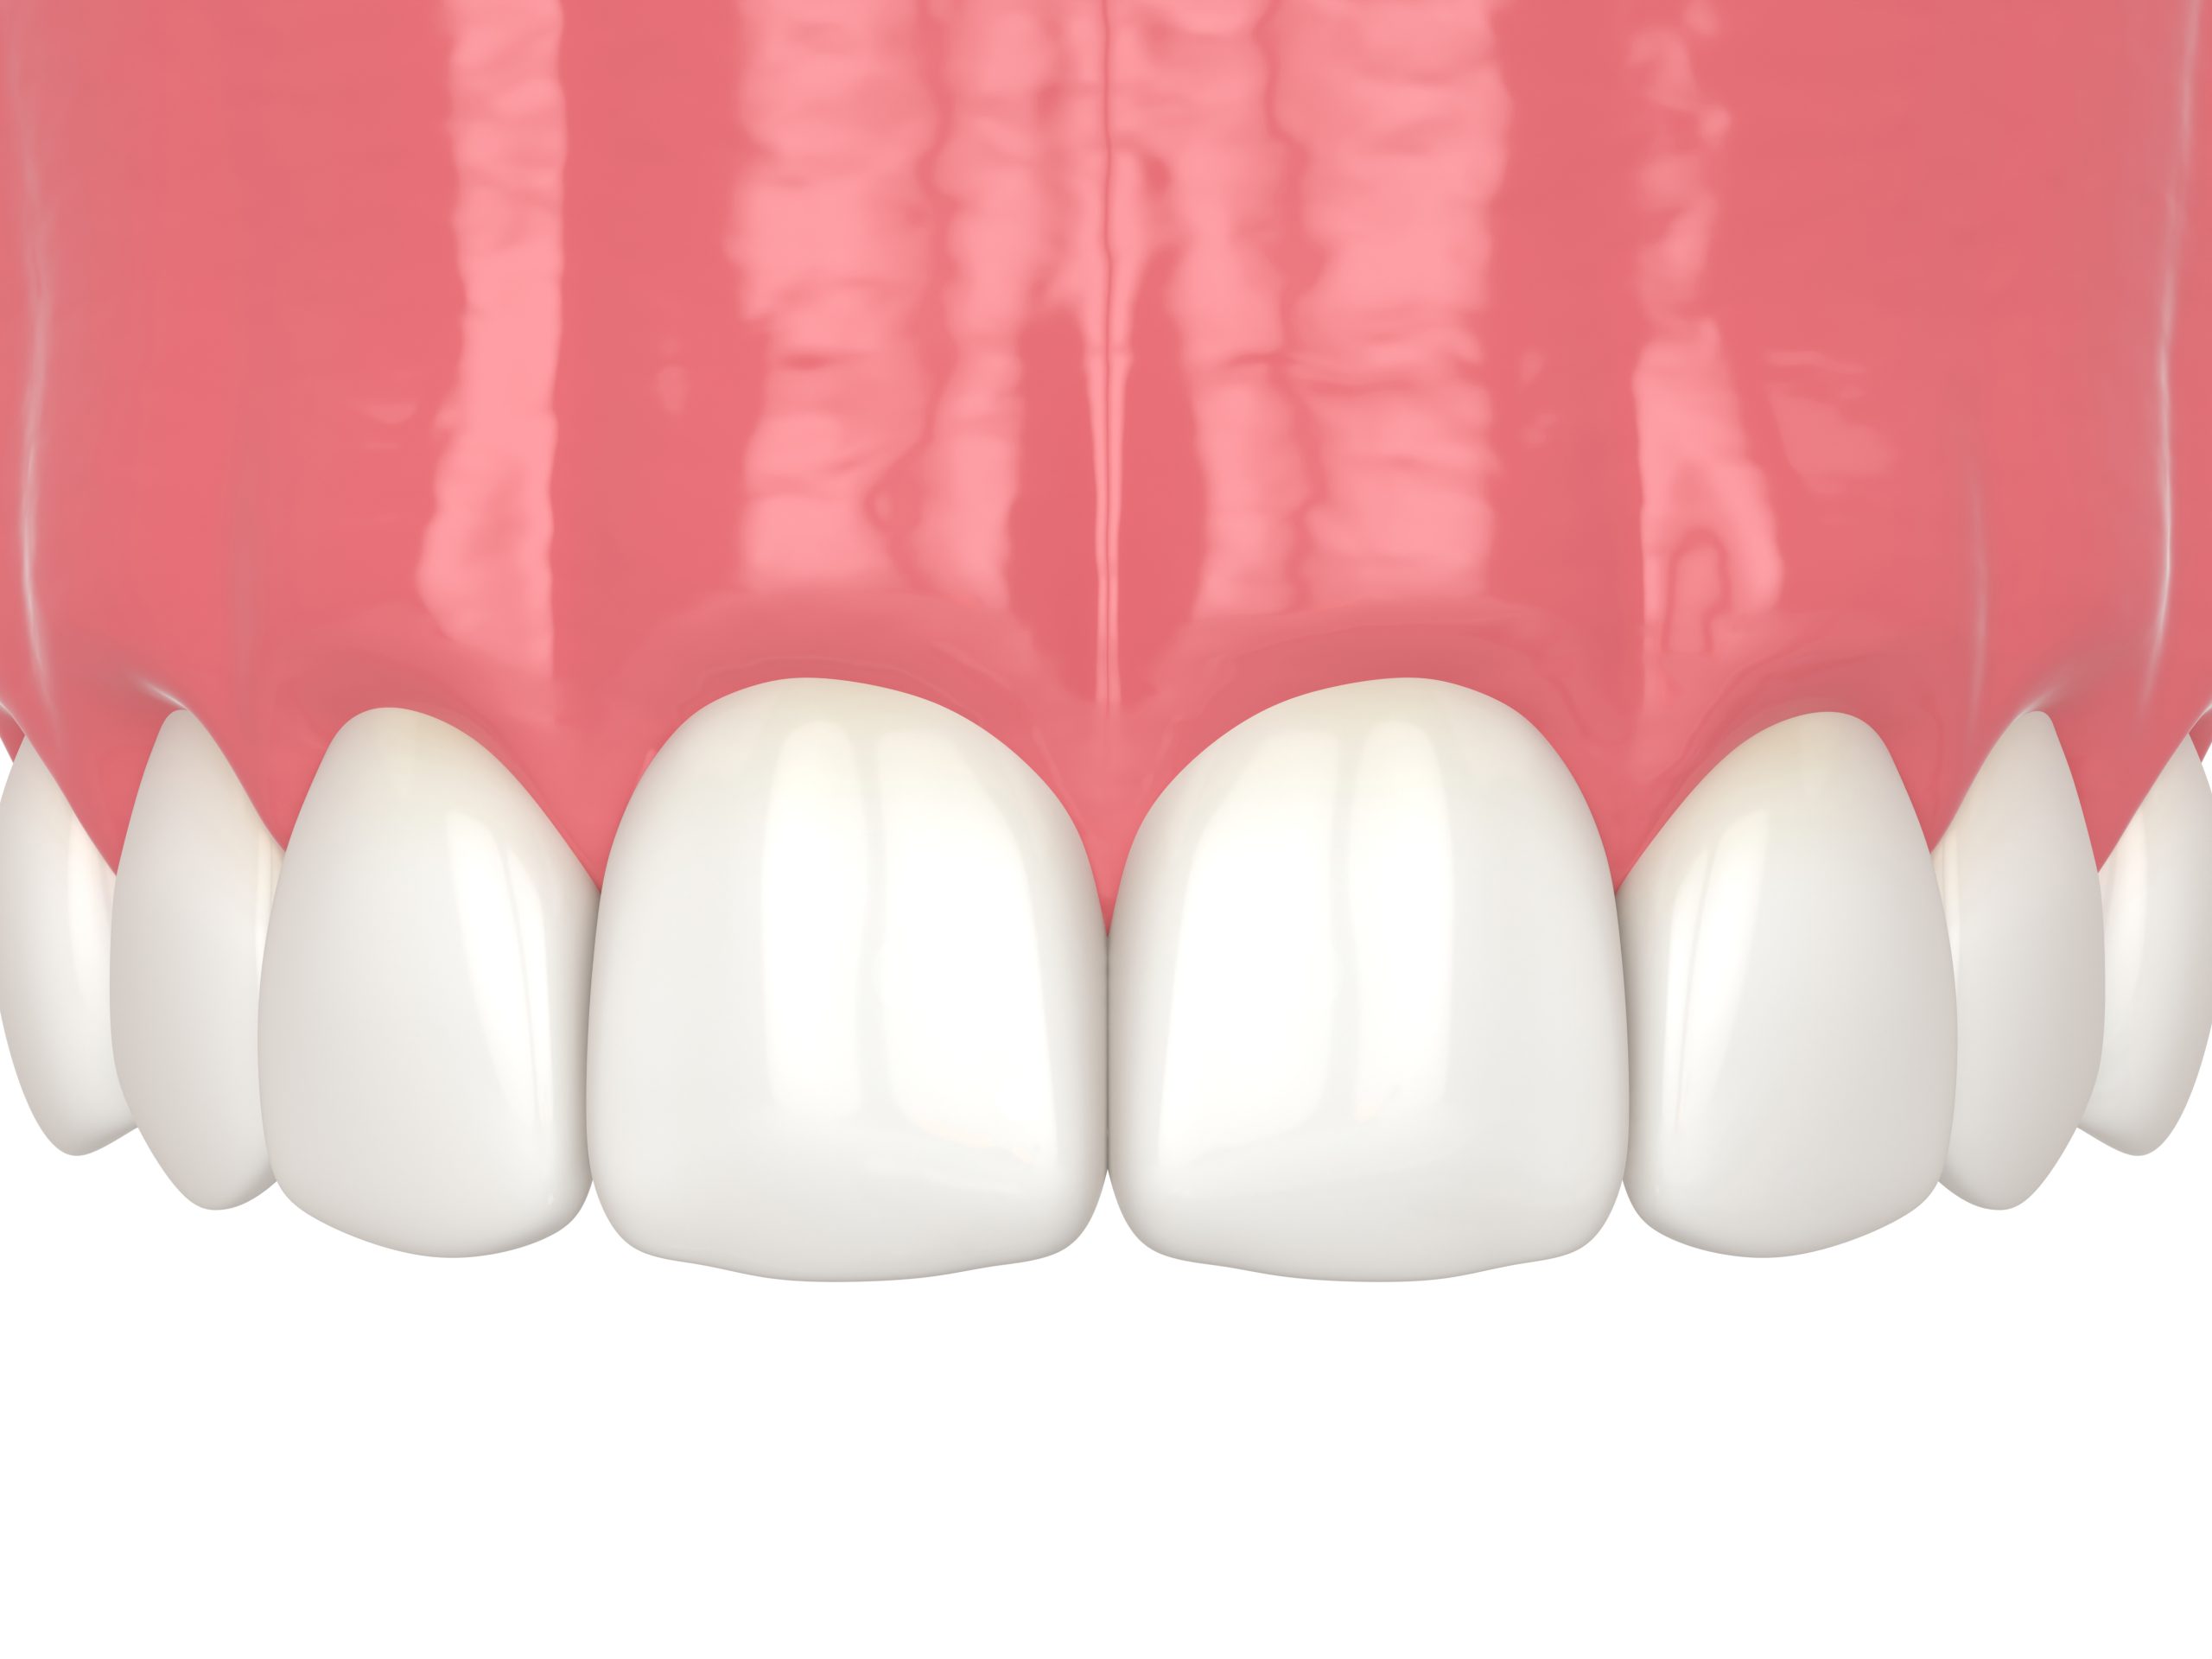 Benefits of cosmetic bonding for your smile